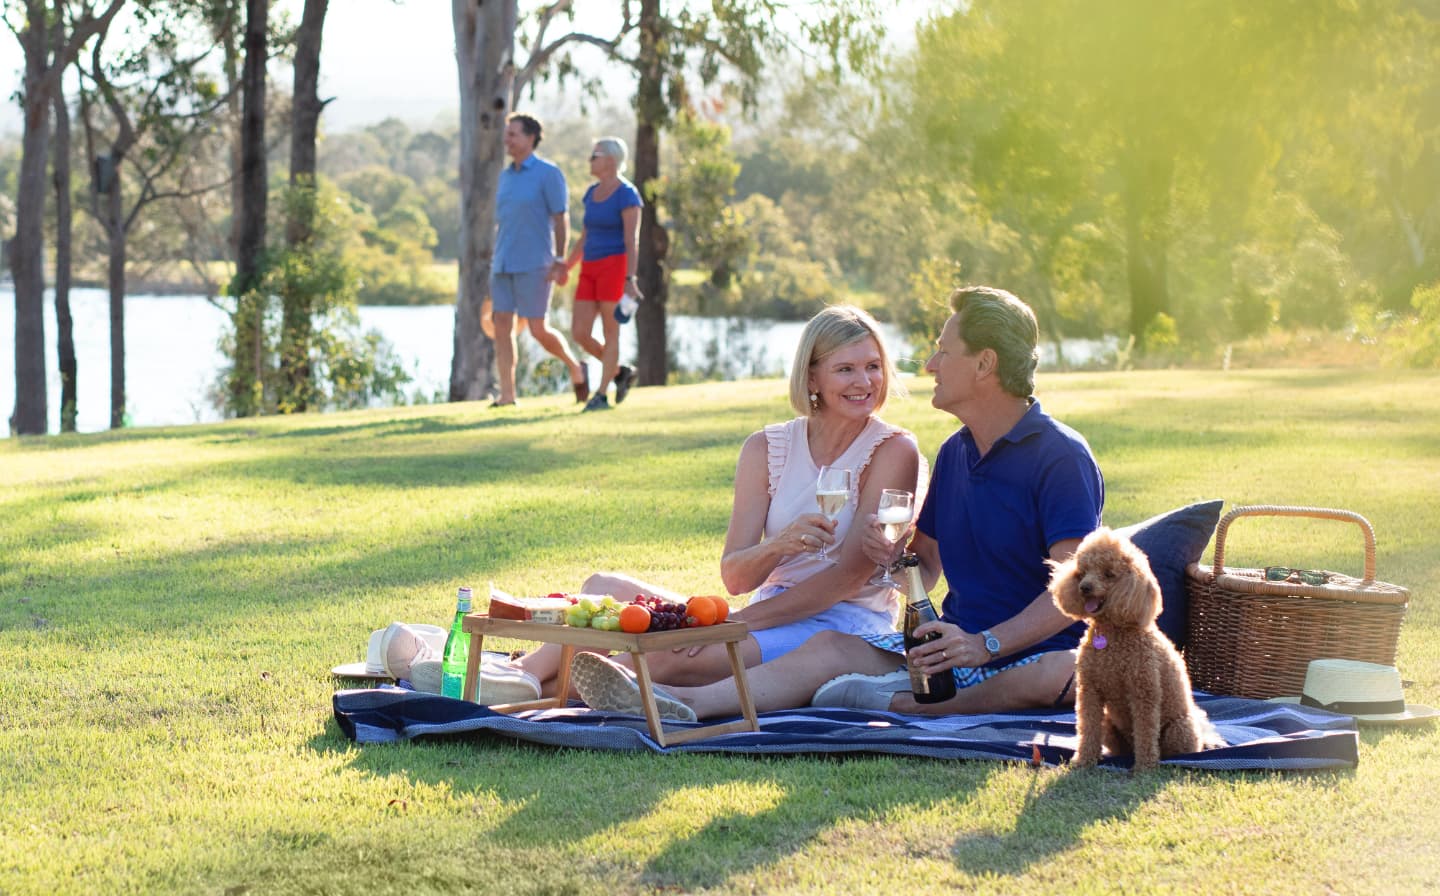 Ingenia Lifestyle Seachange Riverside Coomera old-couple-with-a-dog-having-a-picnic